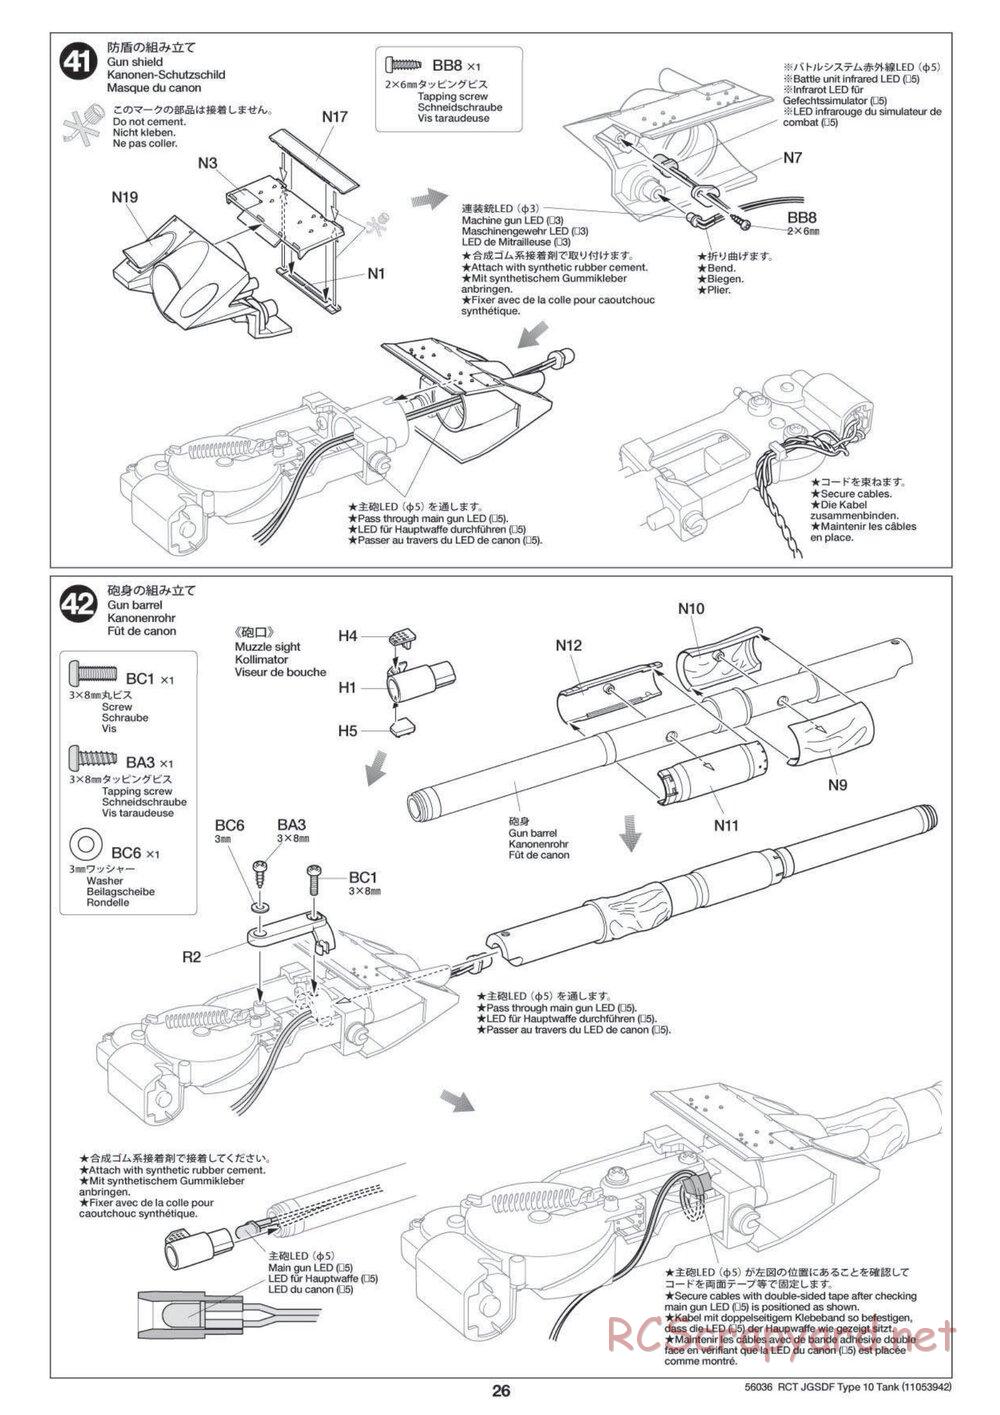 Tamiya - JGSDF Type 10 Tank - 1/16 Scale Chassis - Manual - Page 26